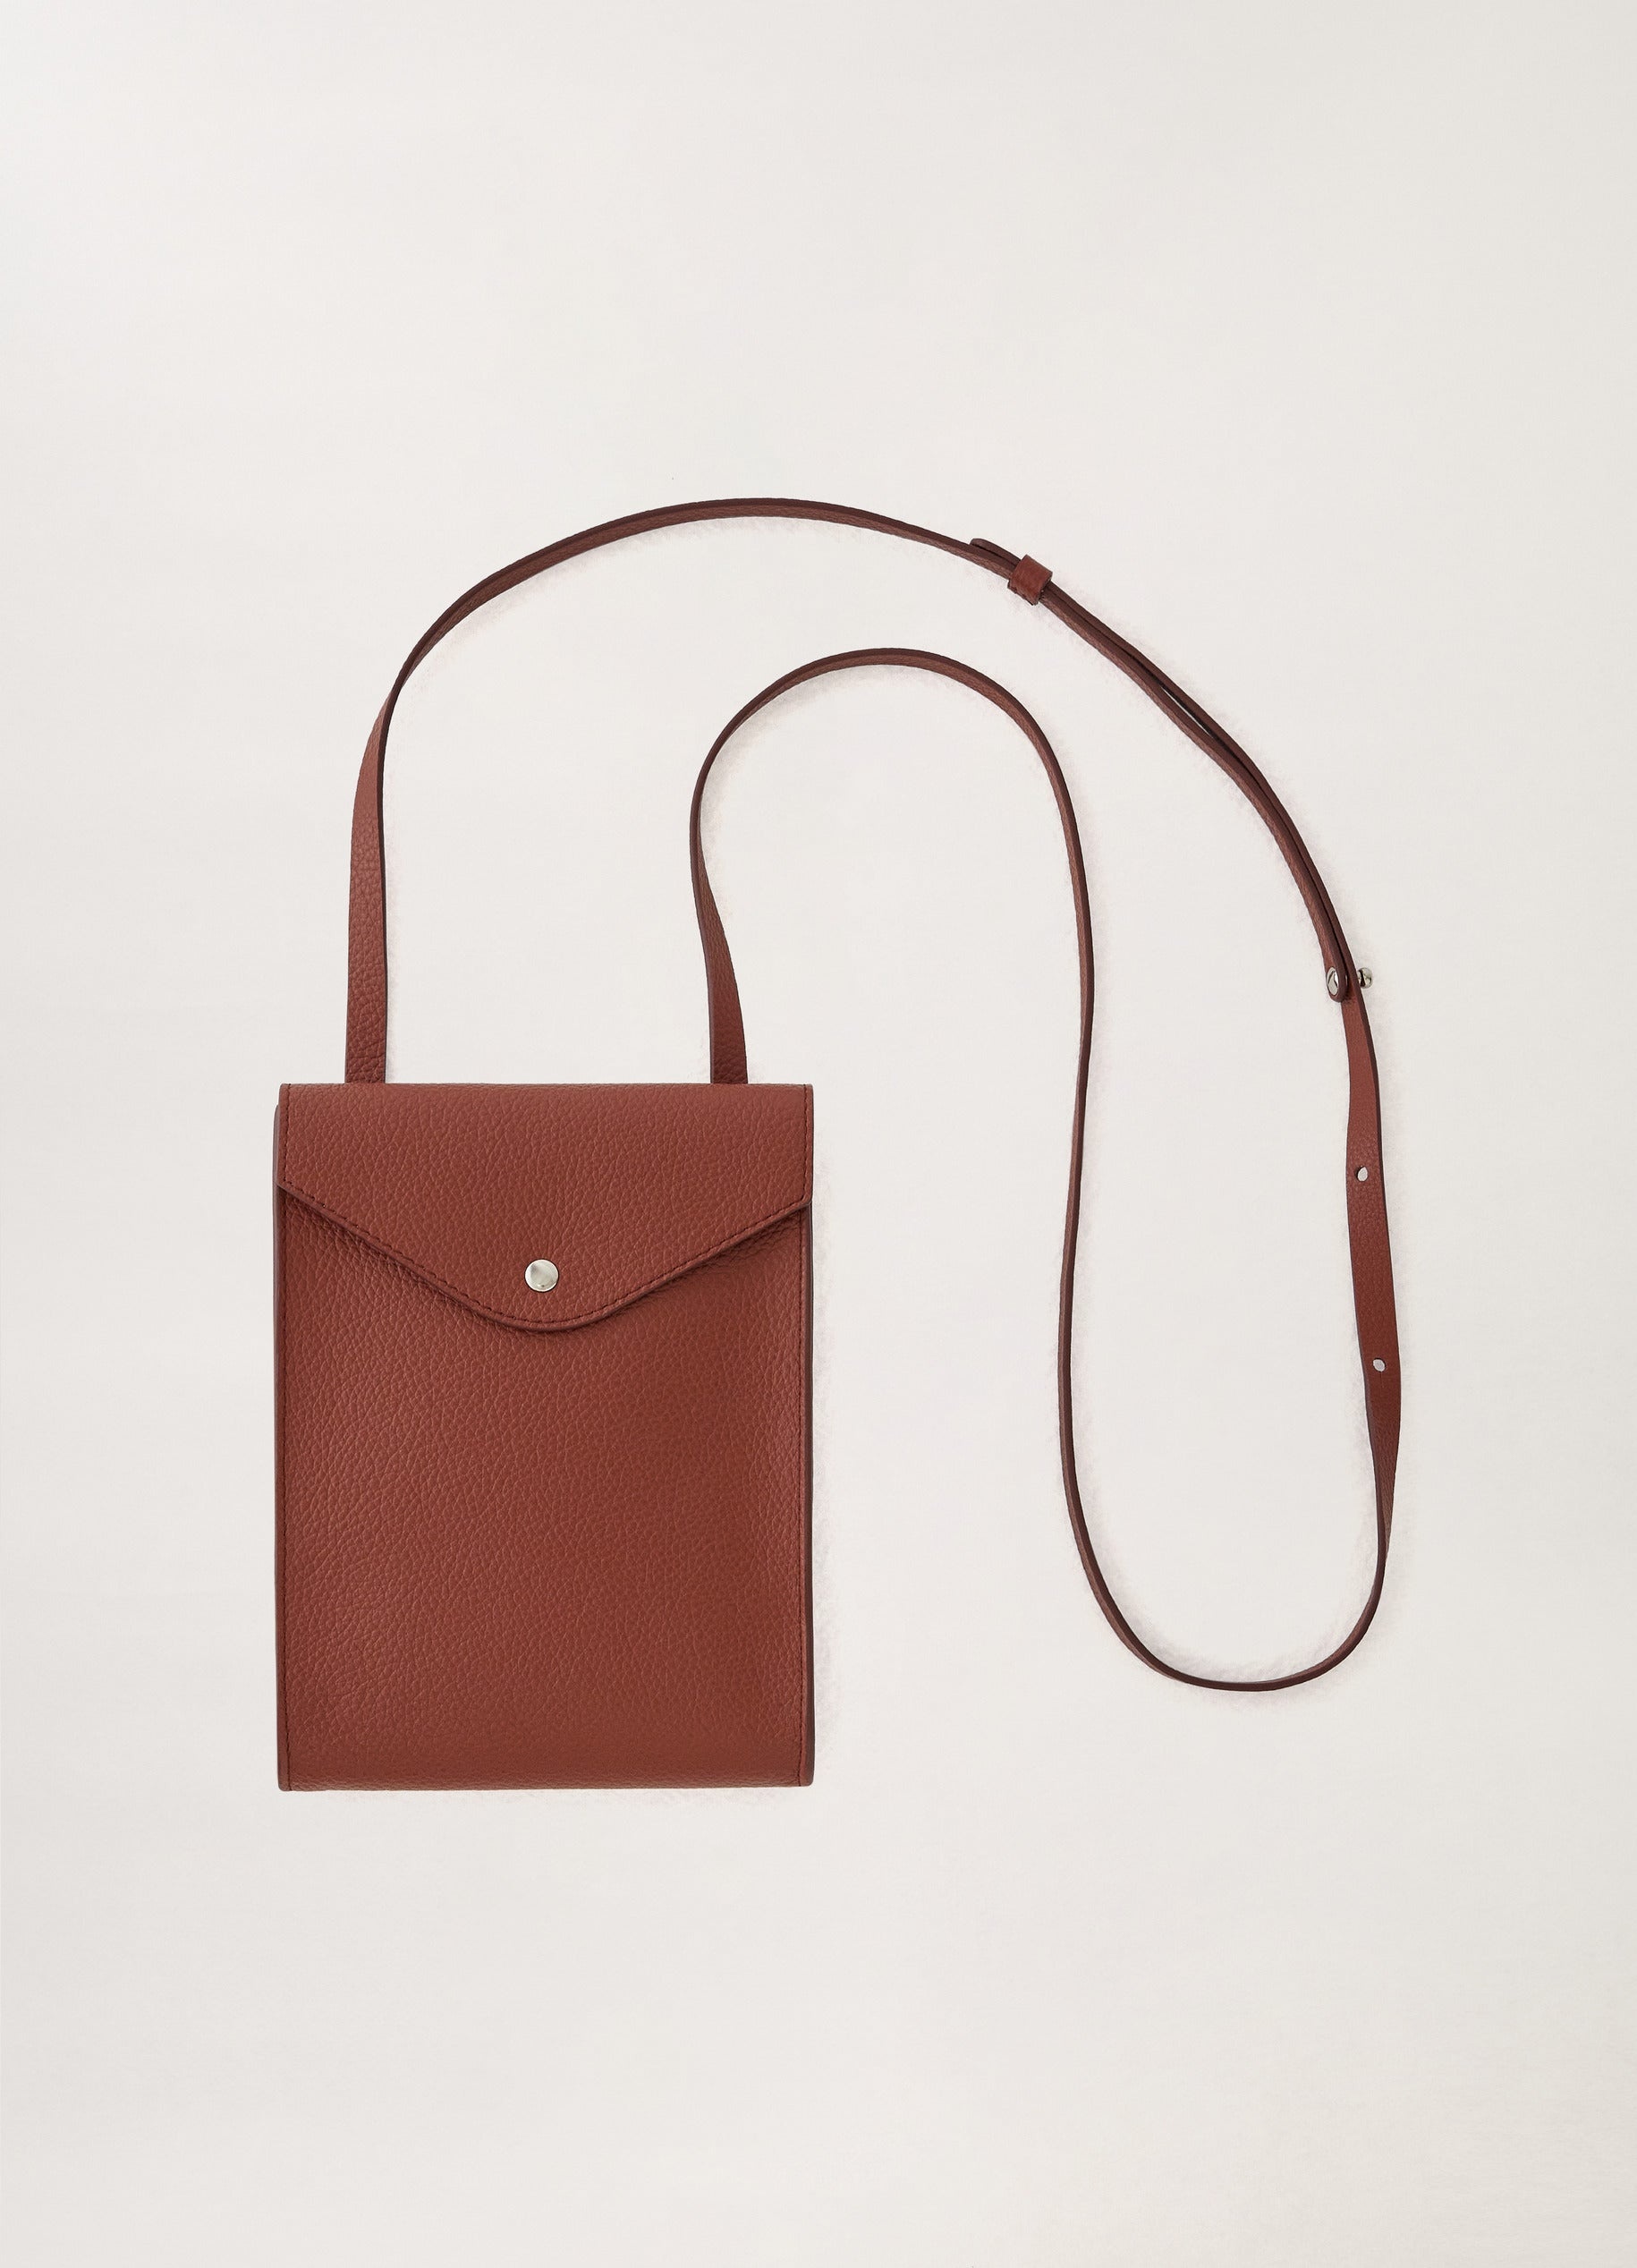 ENVELOPPE WITH STRAP
SOFT GRAINED LEATHER - 3